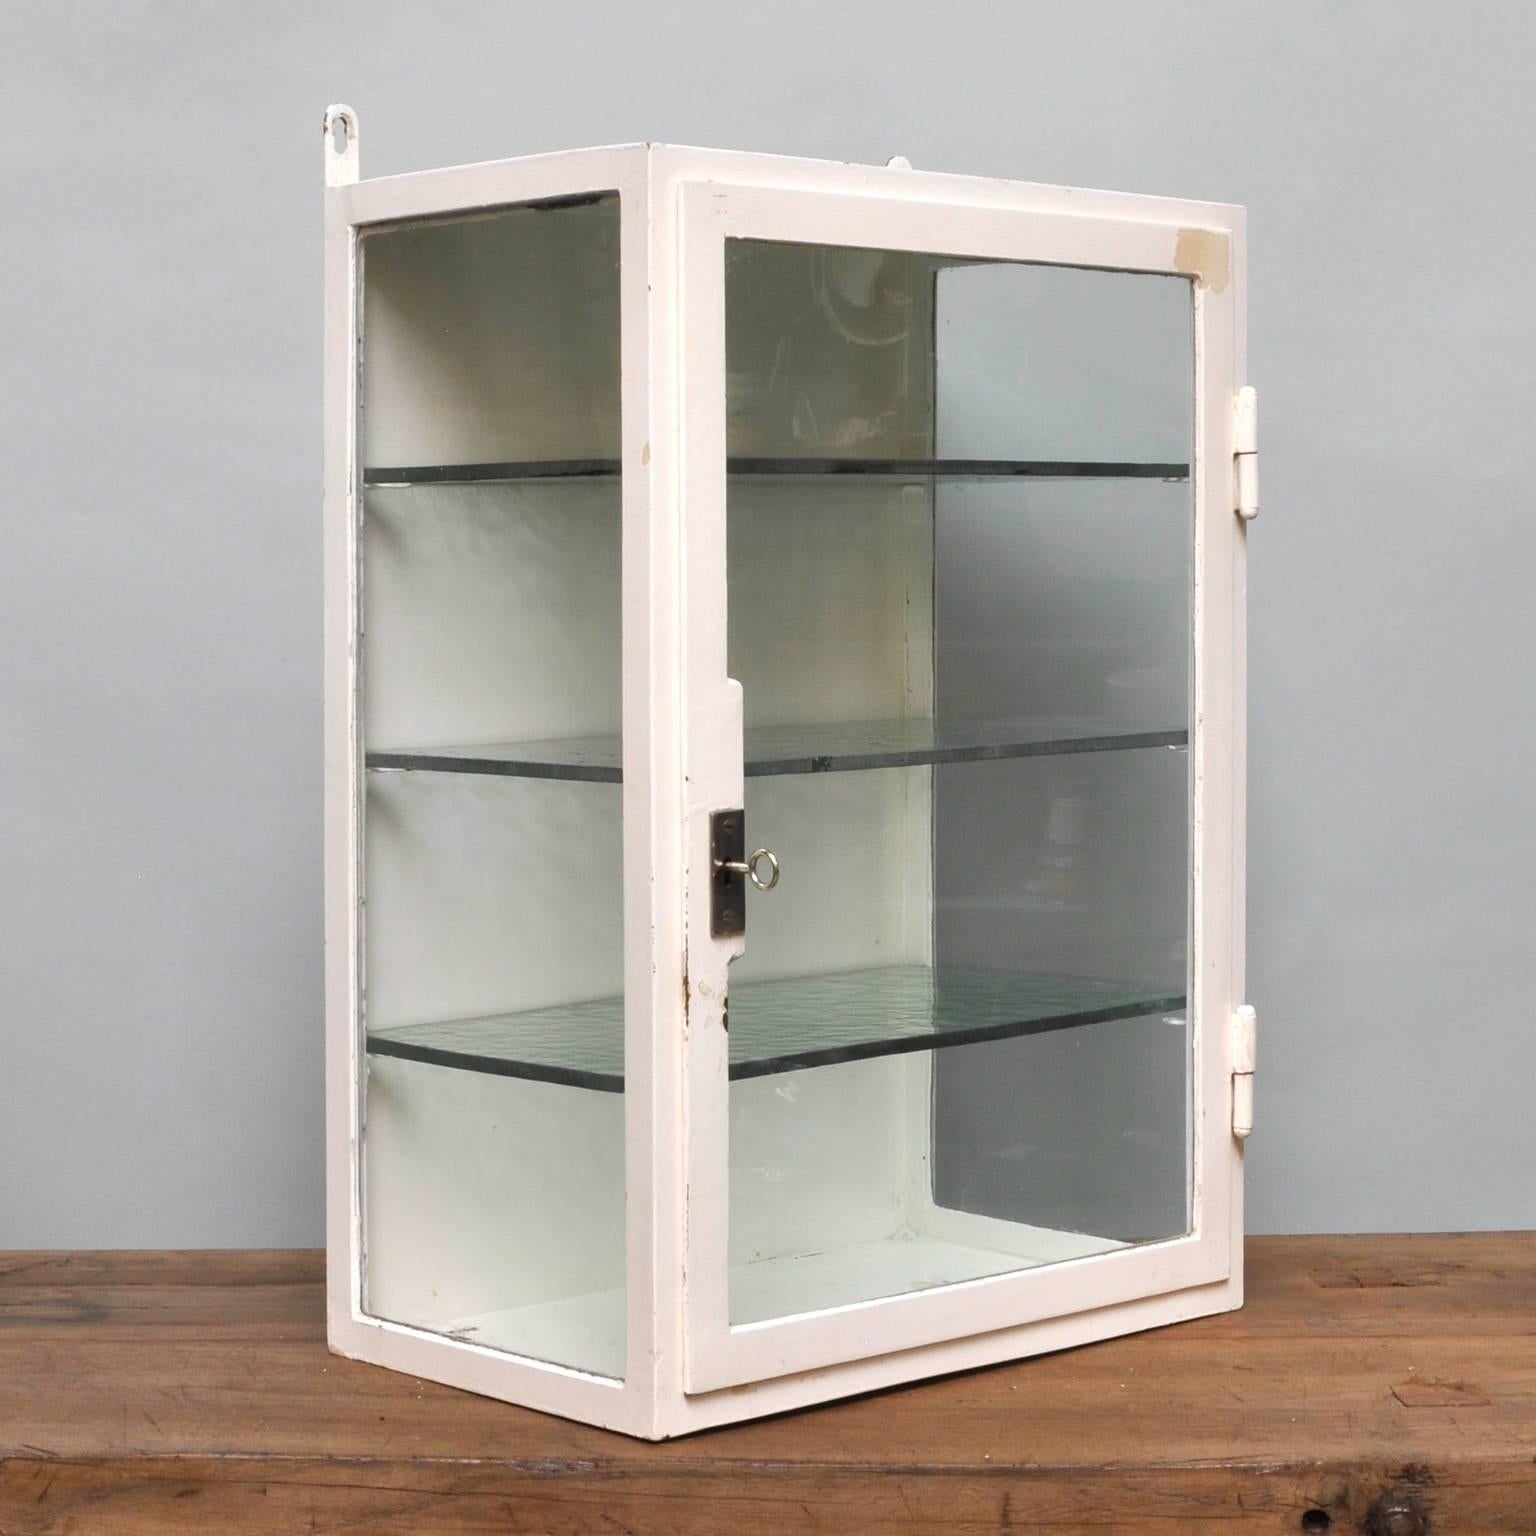 Small medicine cabinet, wall unit which originates from the 1940s. It is made from thick iron with the original antique glass and shelves. It features a good working lock and key system.